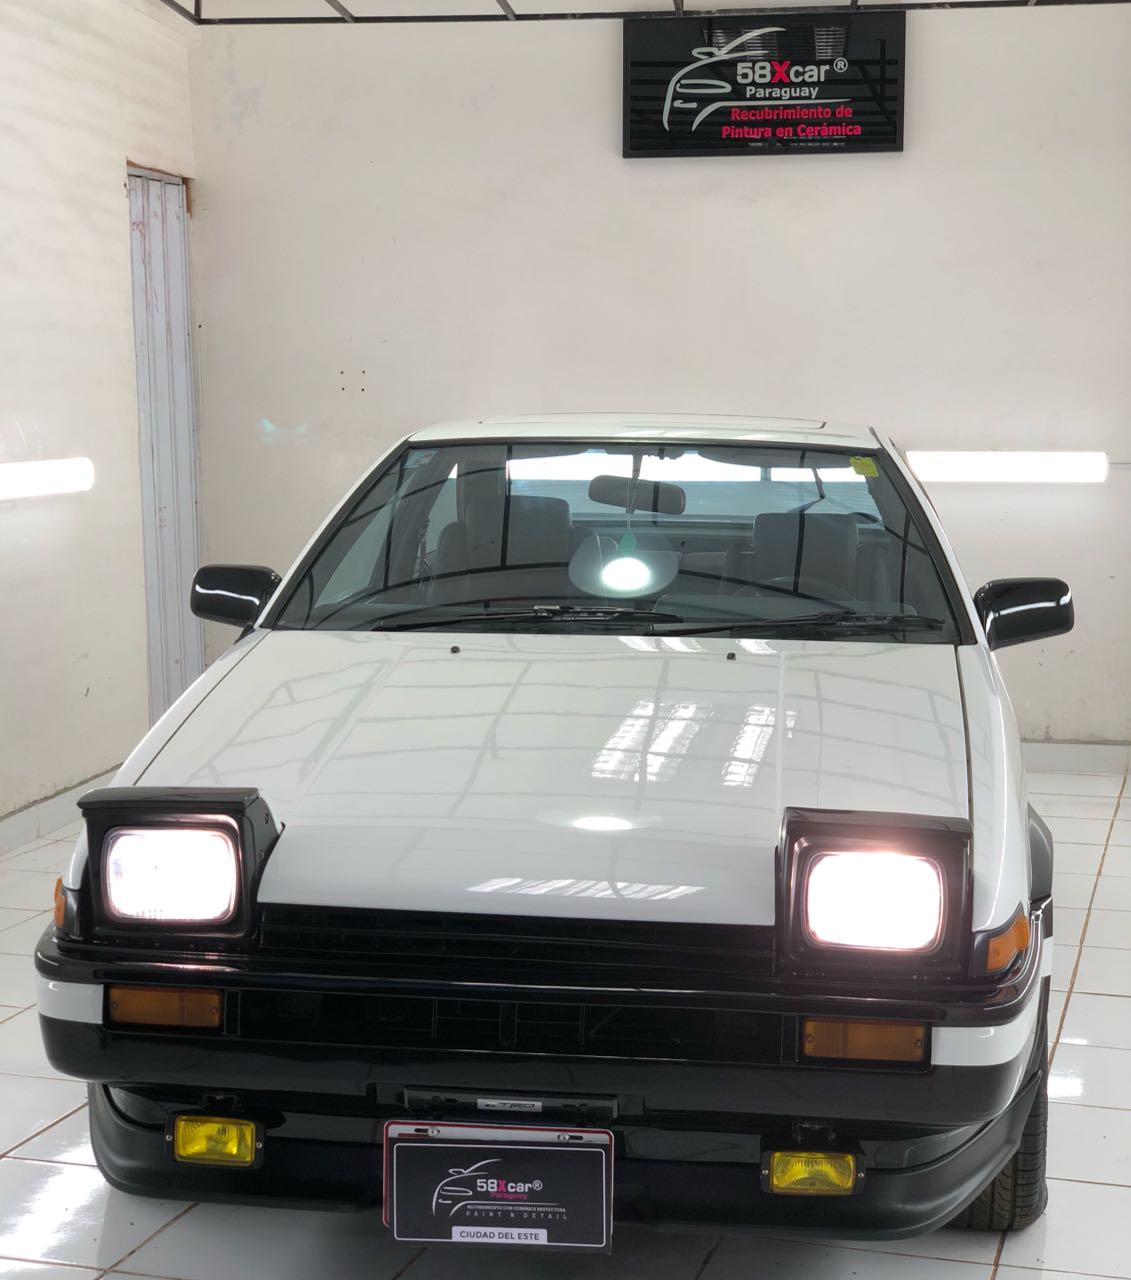 [Image: AEU86 AE86 - Hello, from Paraguay]